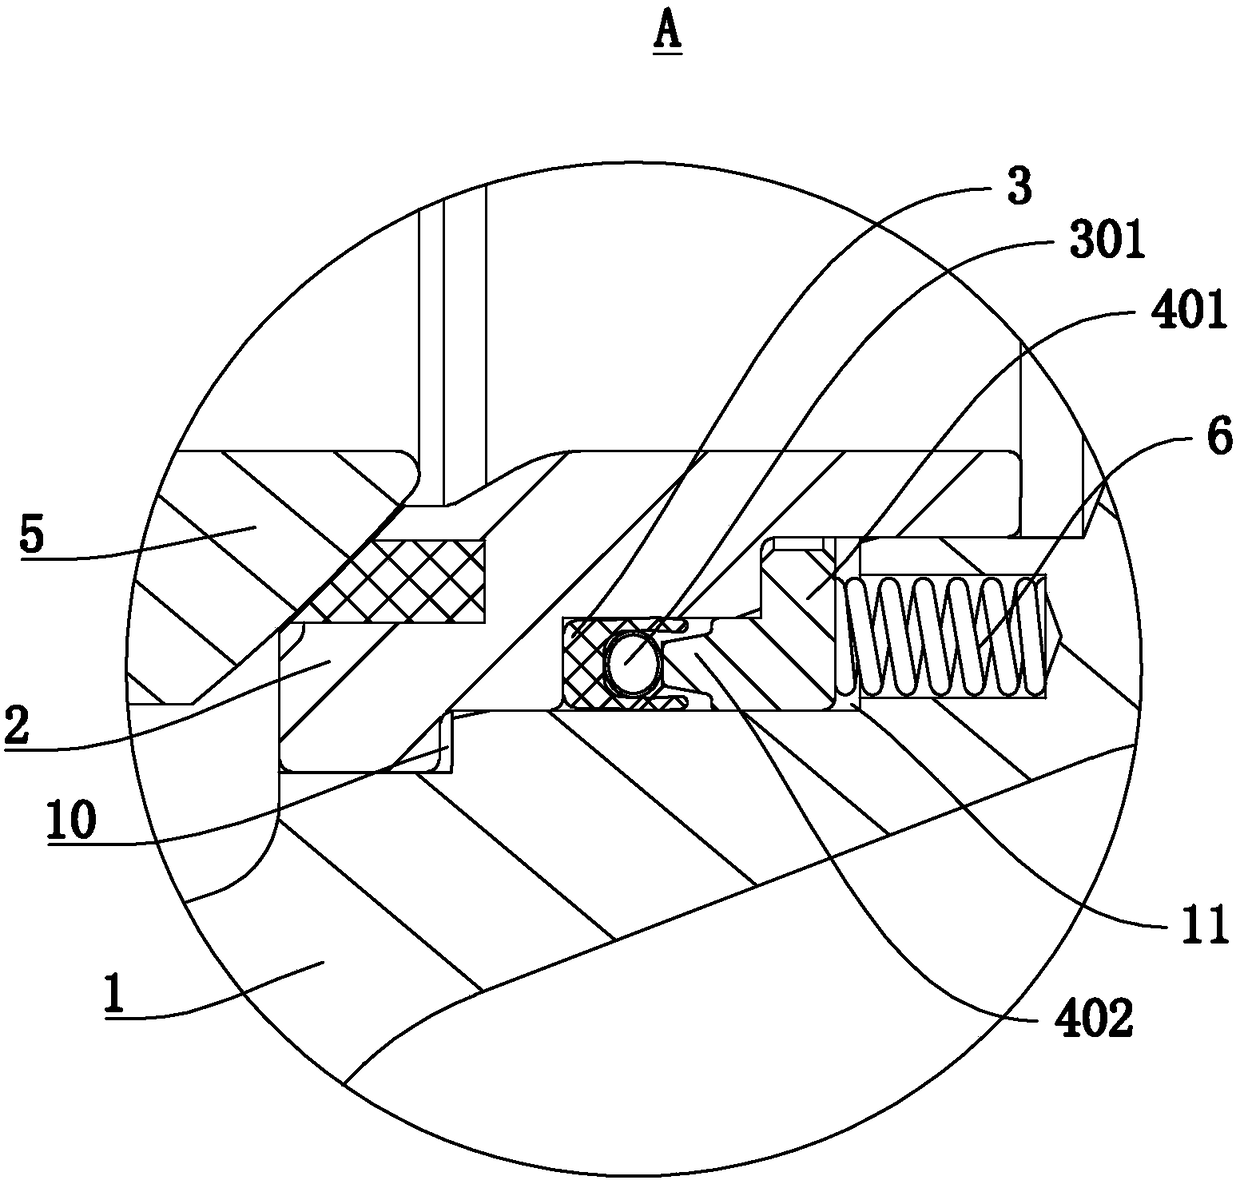 Valve seat sealing mechanism applicable to low temperature working conditions